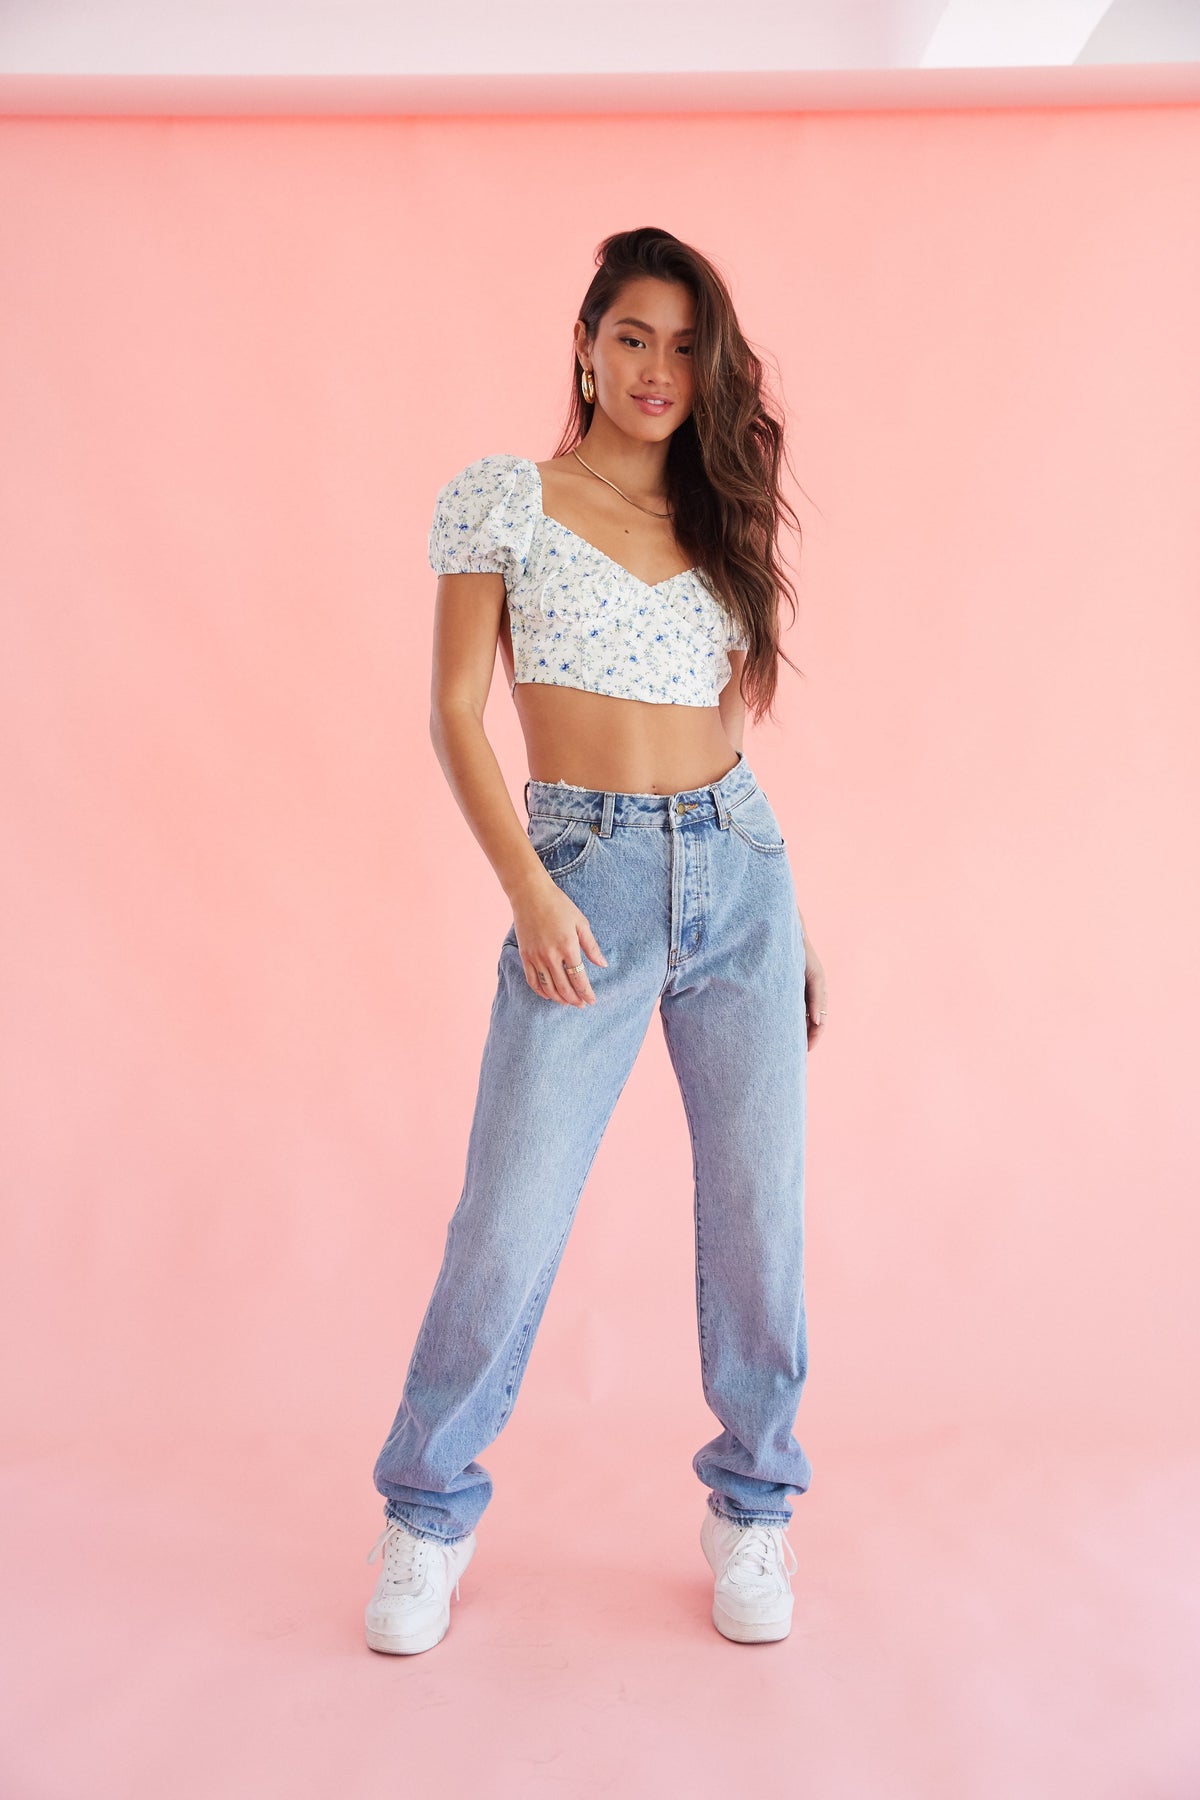 Rolla's Classic Straight Jeans in 90s Blue